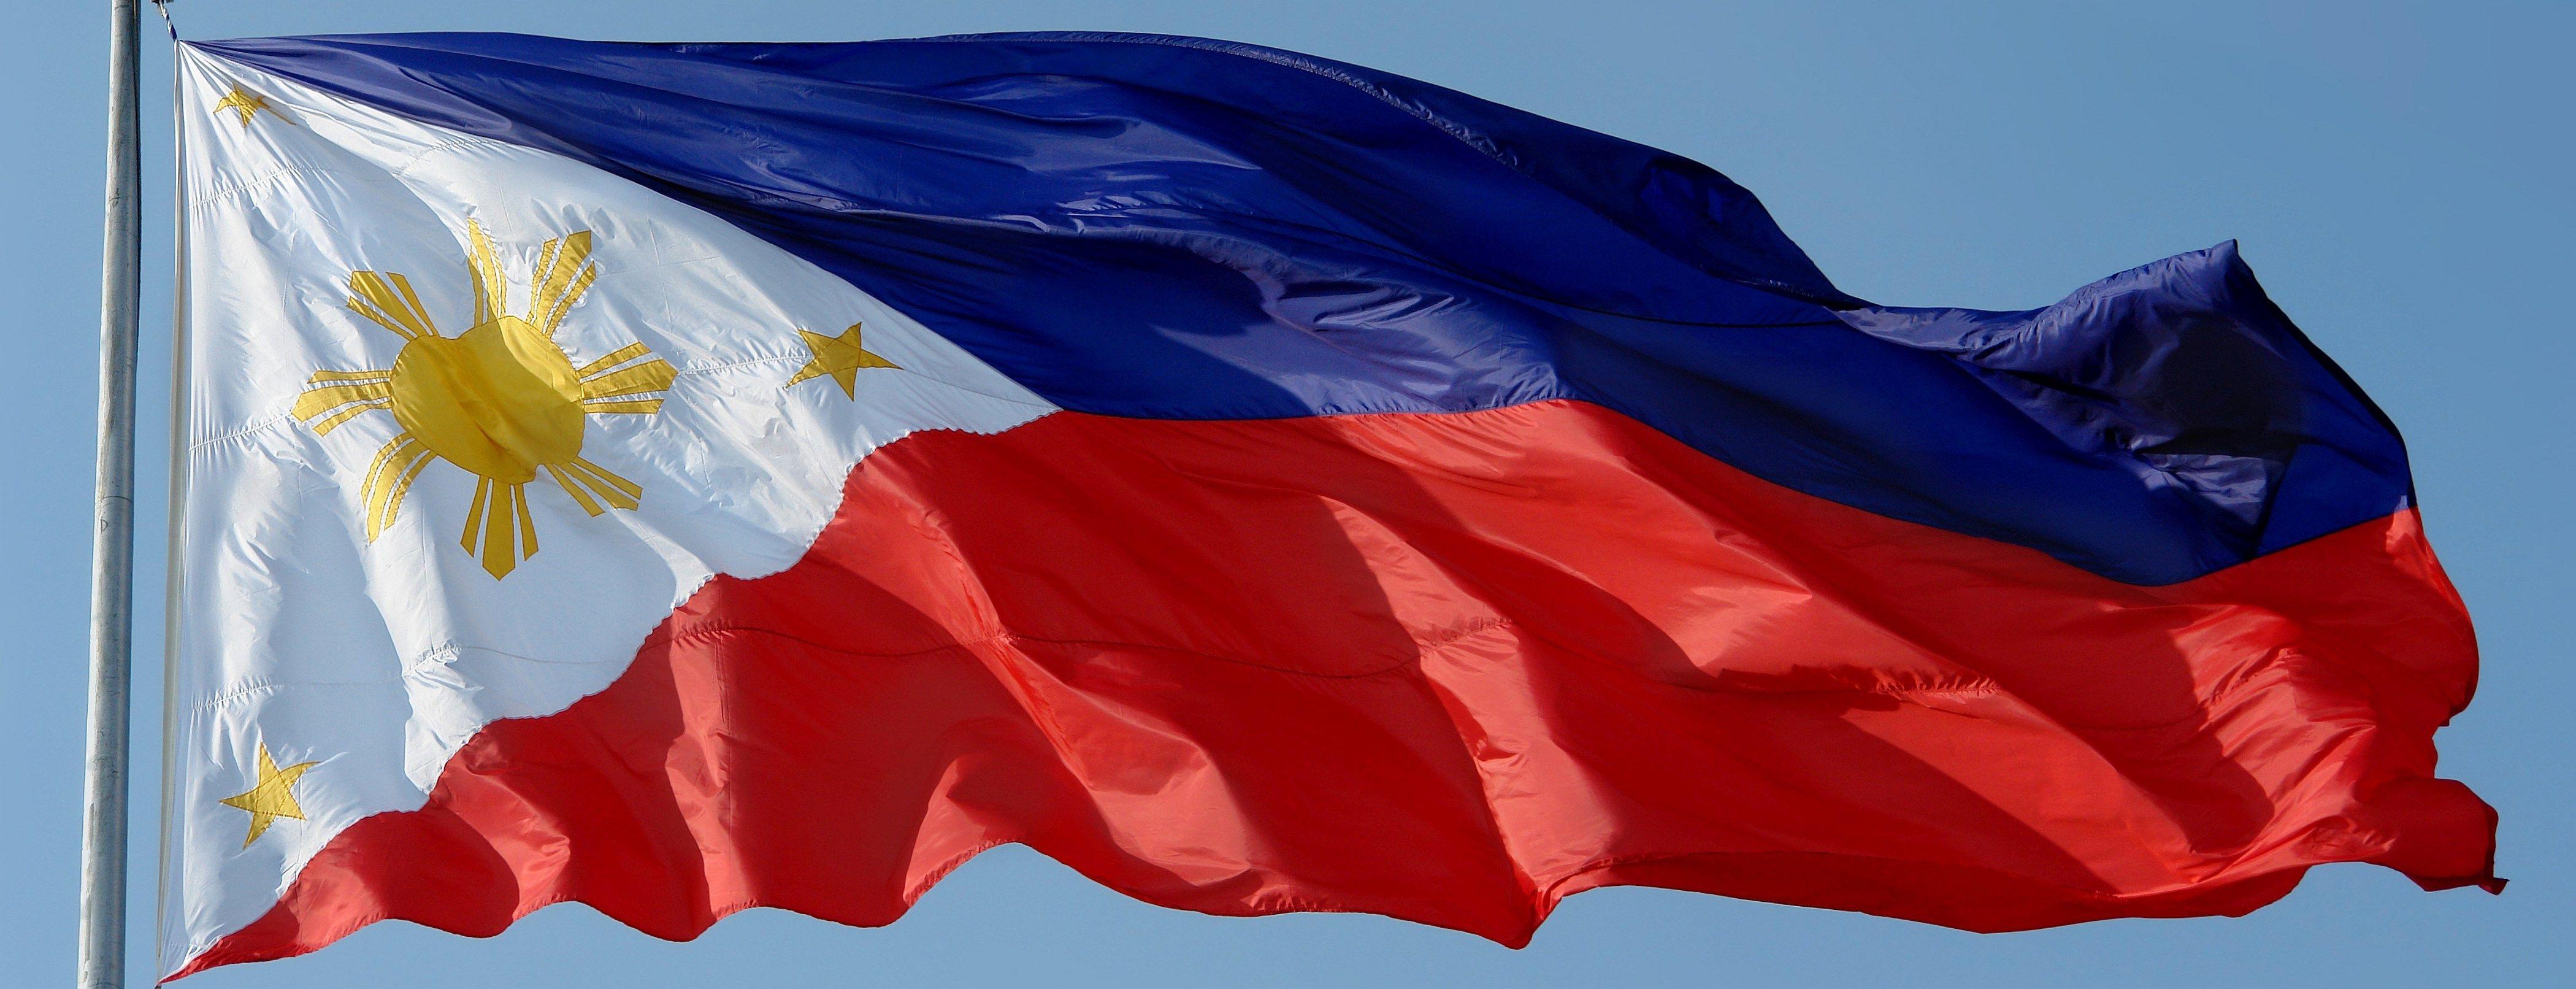 wallpaper free flag of the philippinesx1612